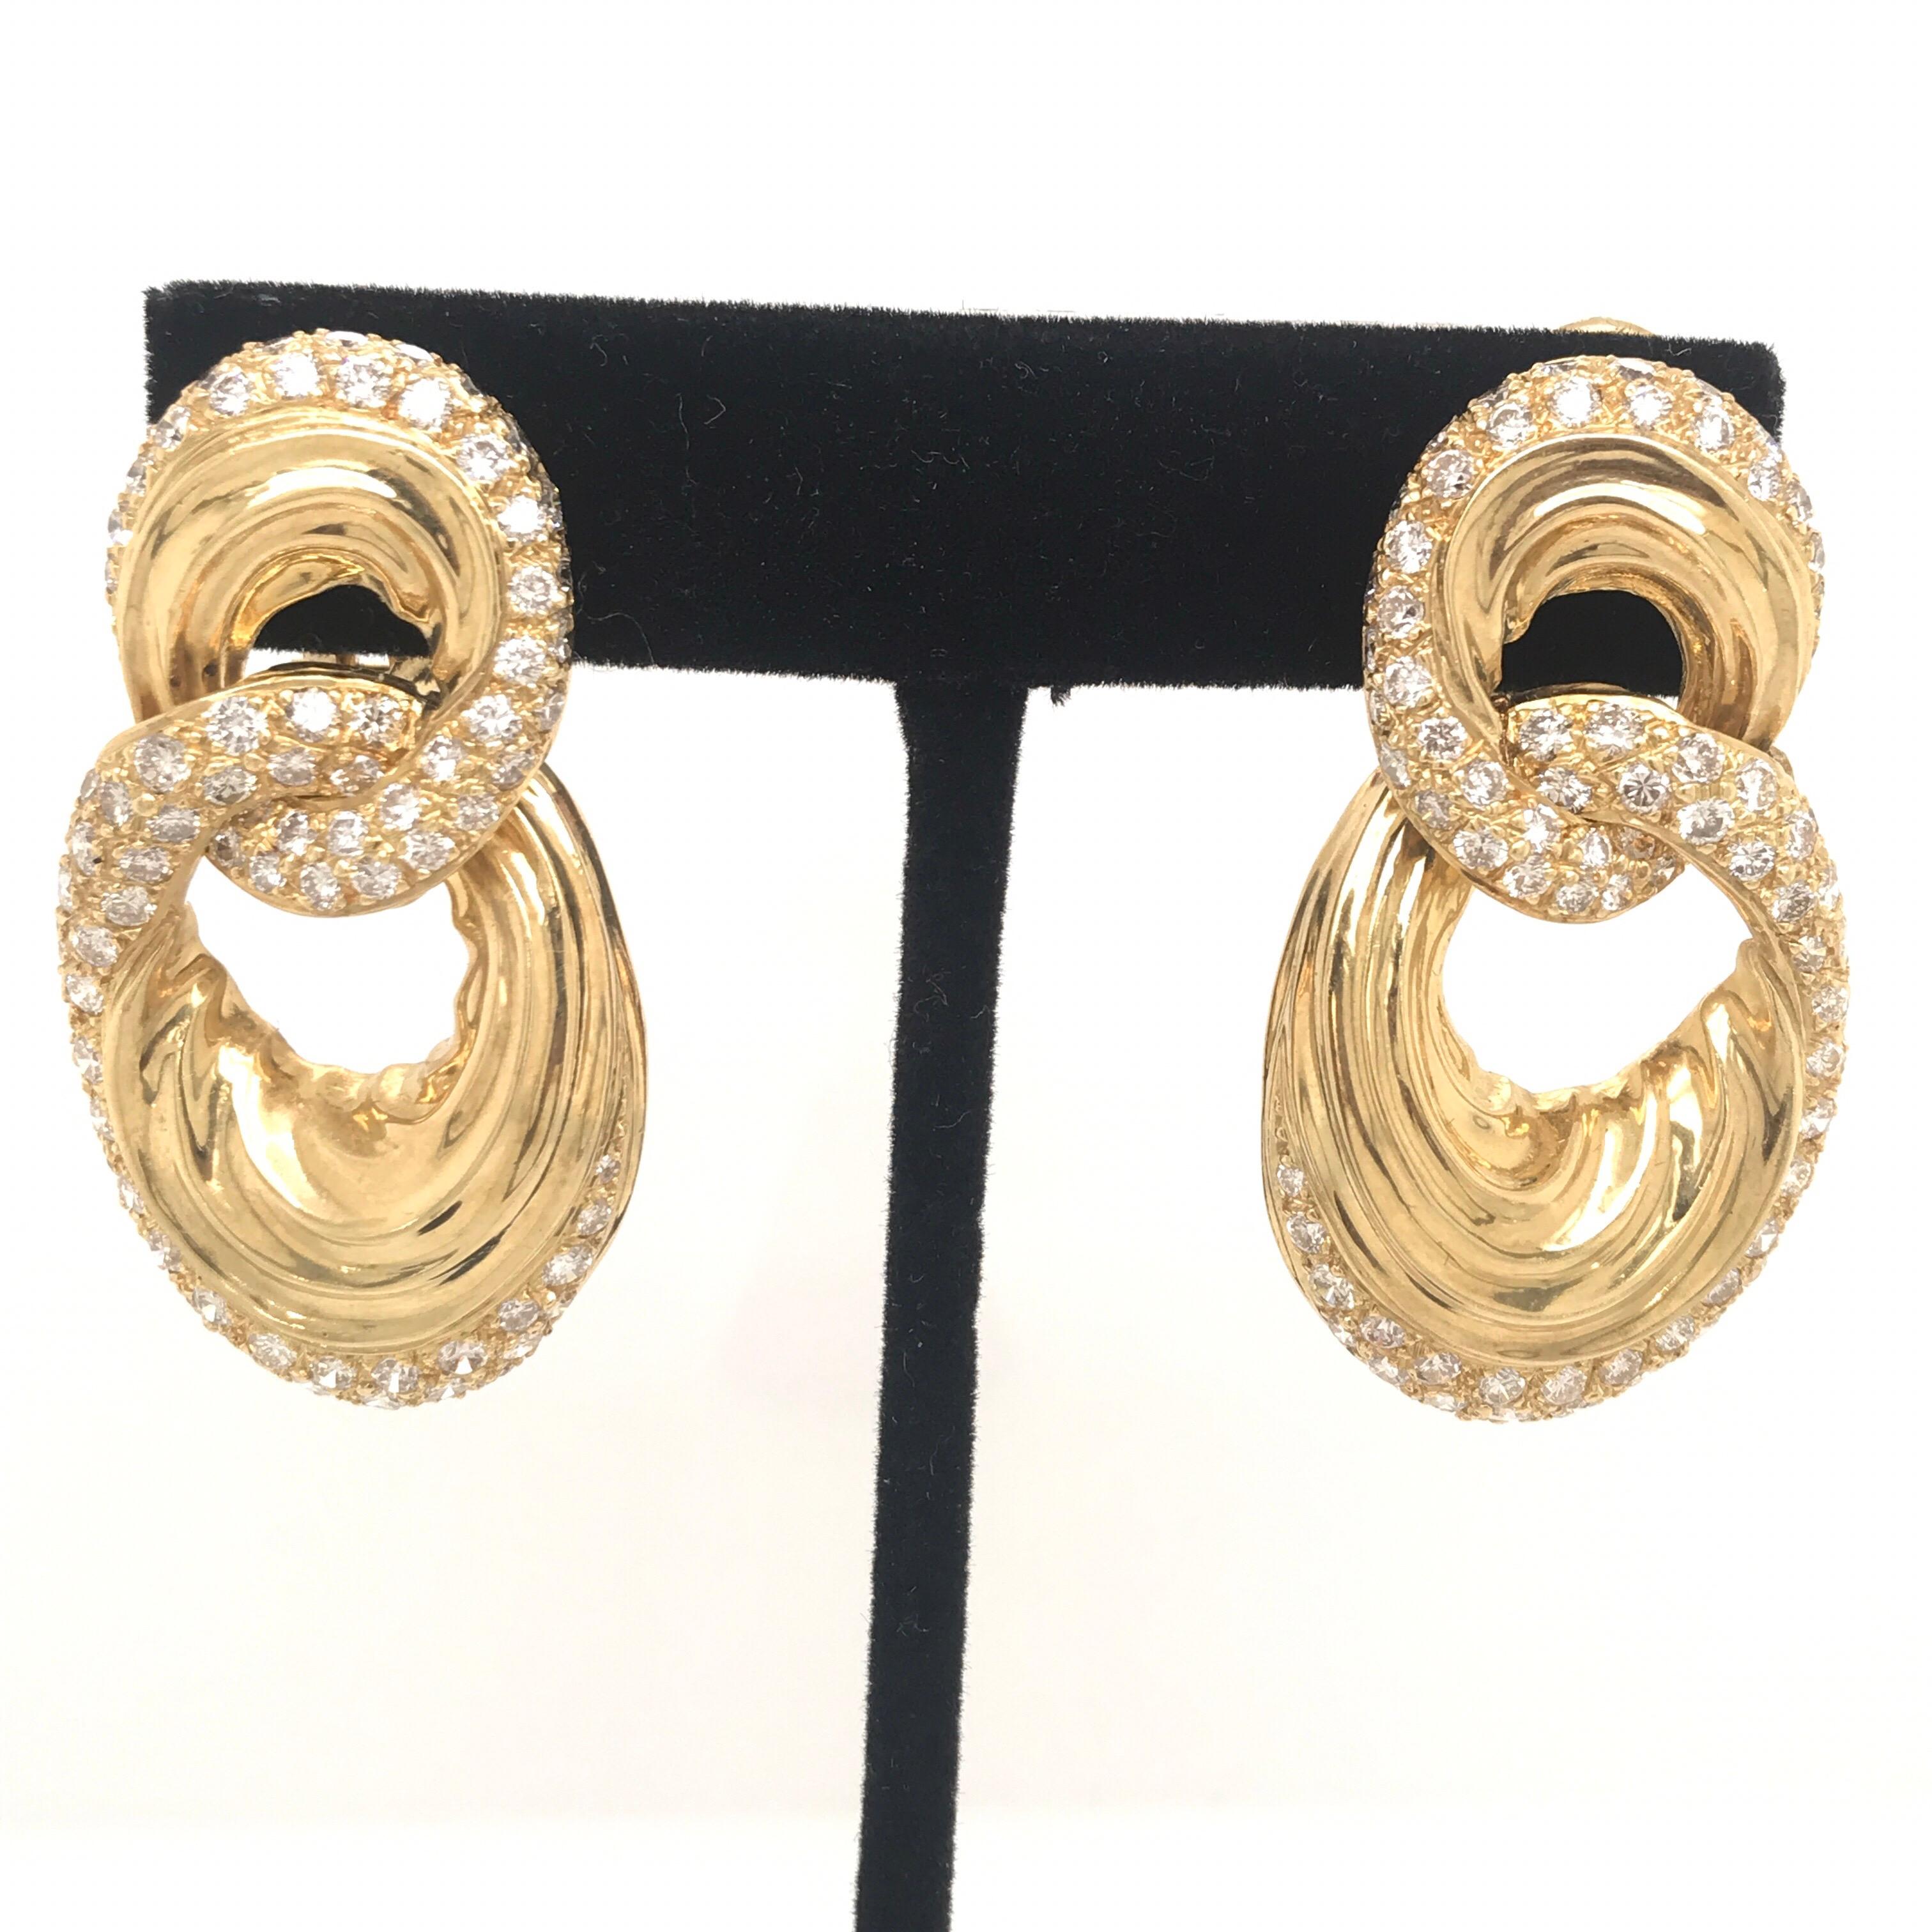 18K Yellow Gold door knocker earrings featuring round brilliants weighing 6.92 carats. Very chic!! 
Color H
Clarity SI